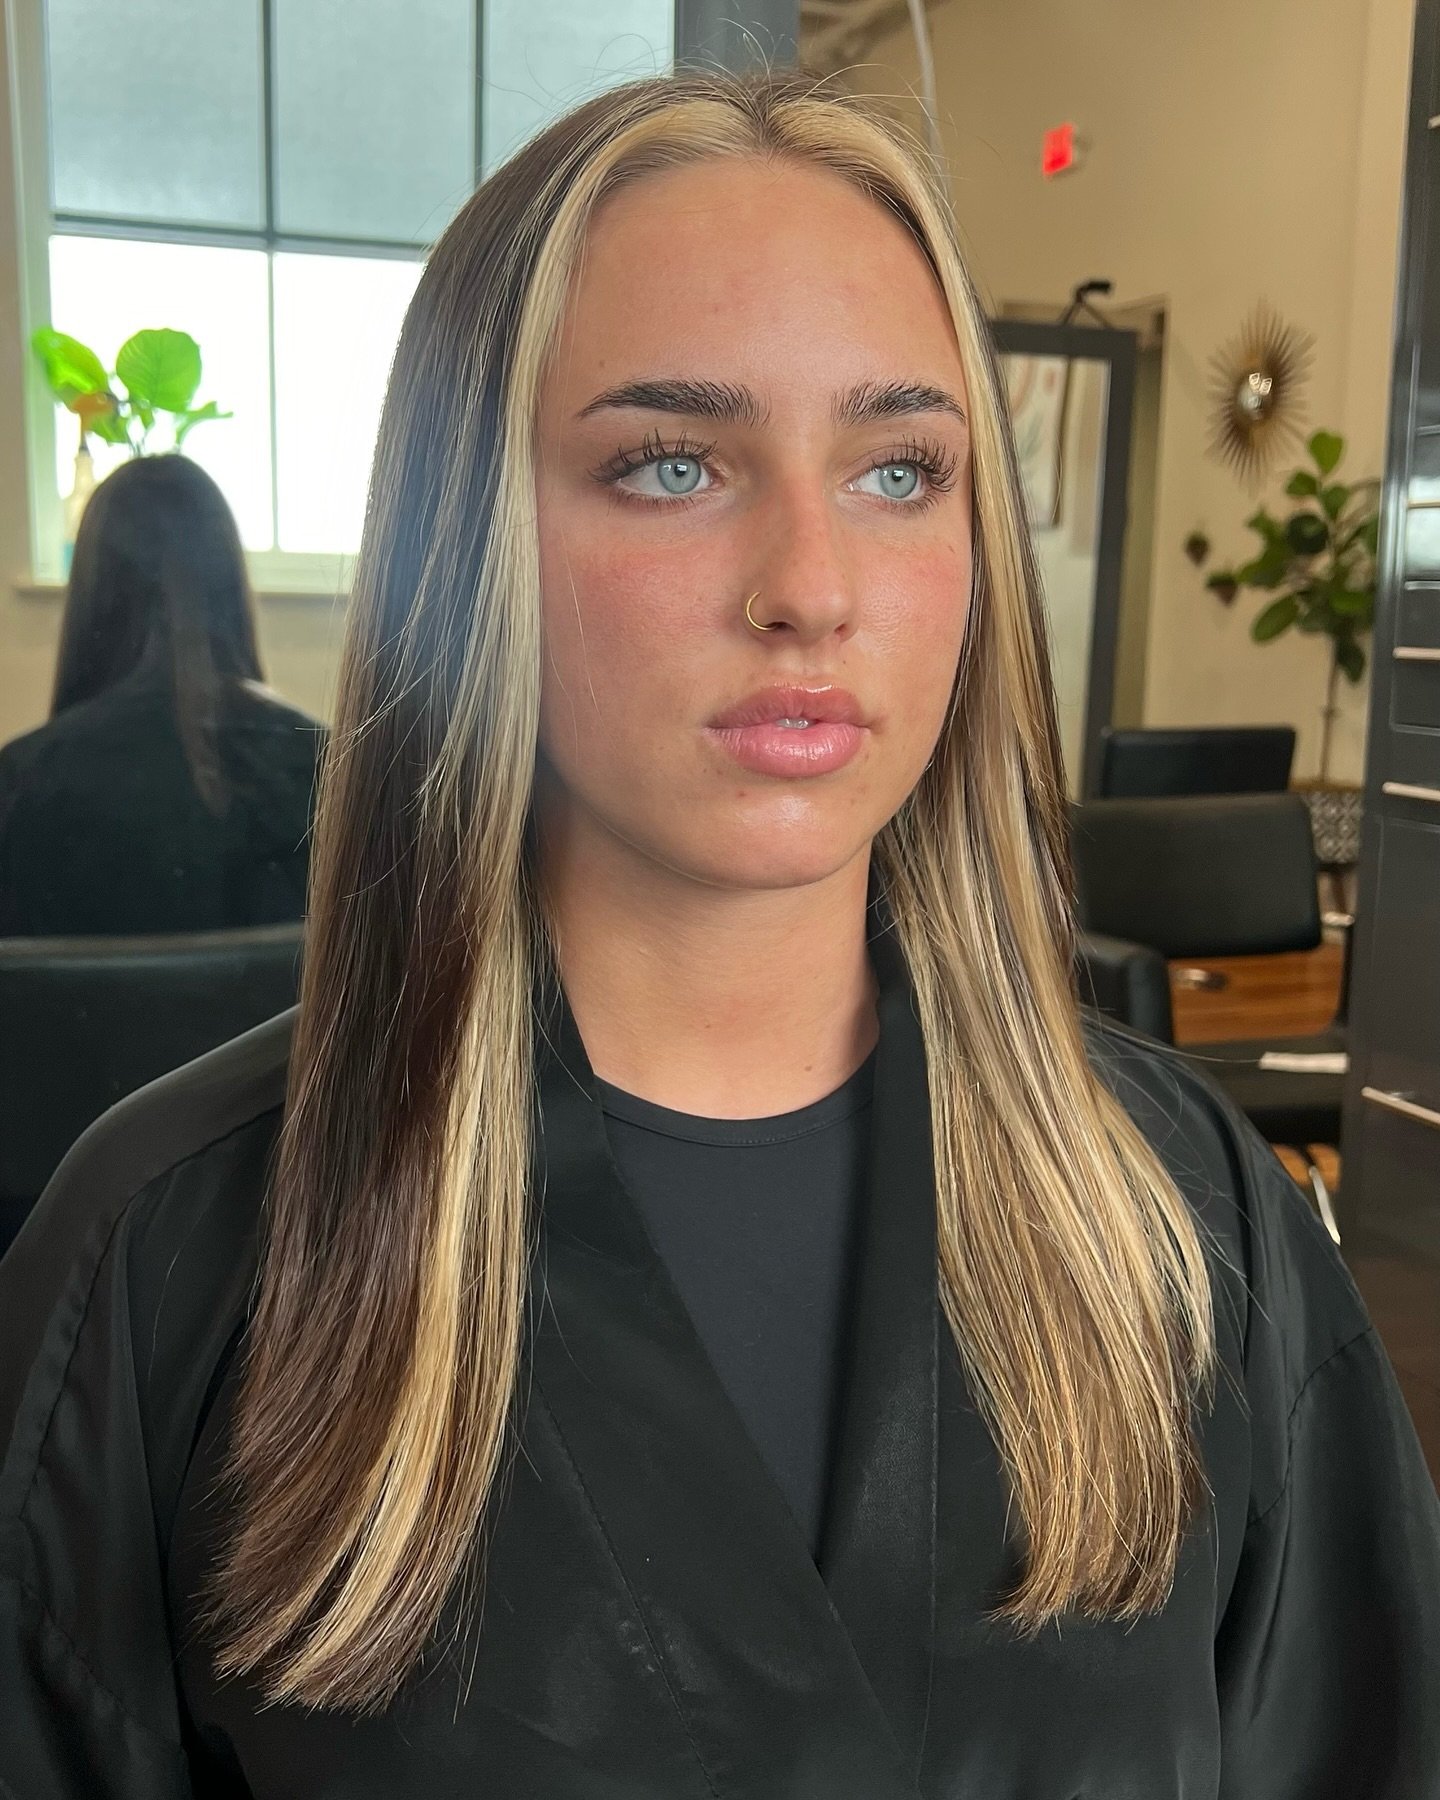 We ❤️❤️❤️❤️ a high contrast moment ✨ Book your next color with us at www.modelcitizensaloncompany.com 😍

Look created by Damaris @dr.hairandbeauty for @modelcitizensalon washed with @redken Acidic Bonding Concentrate System &amp; styled using One Un